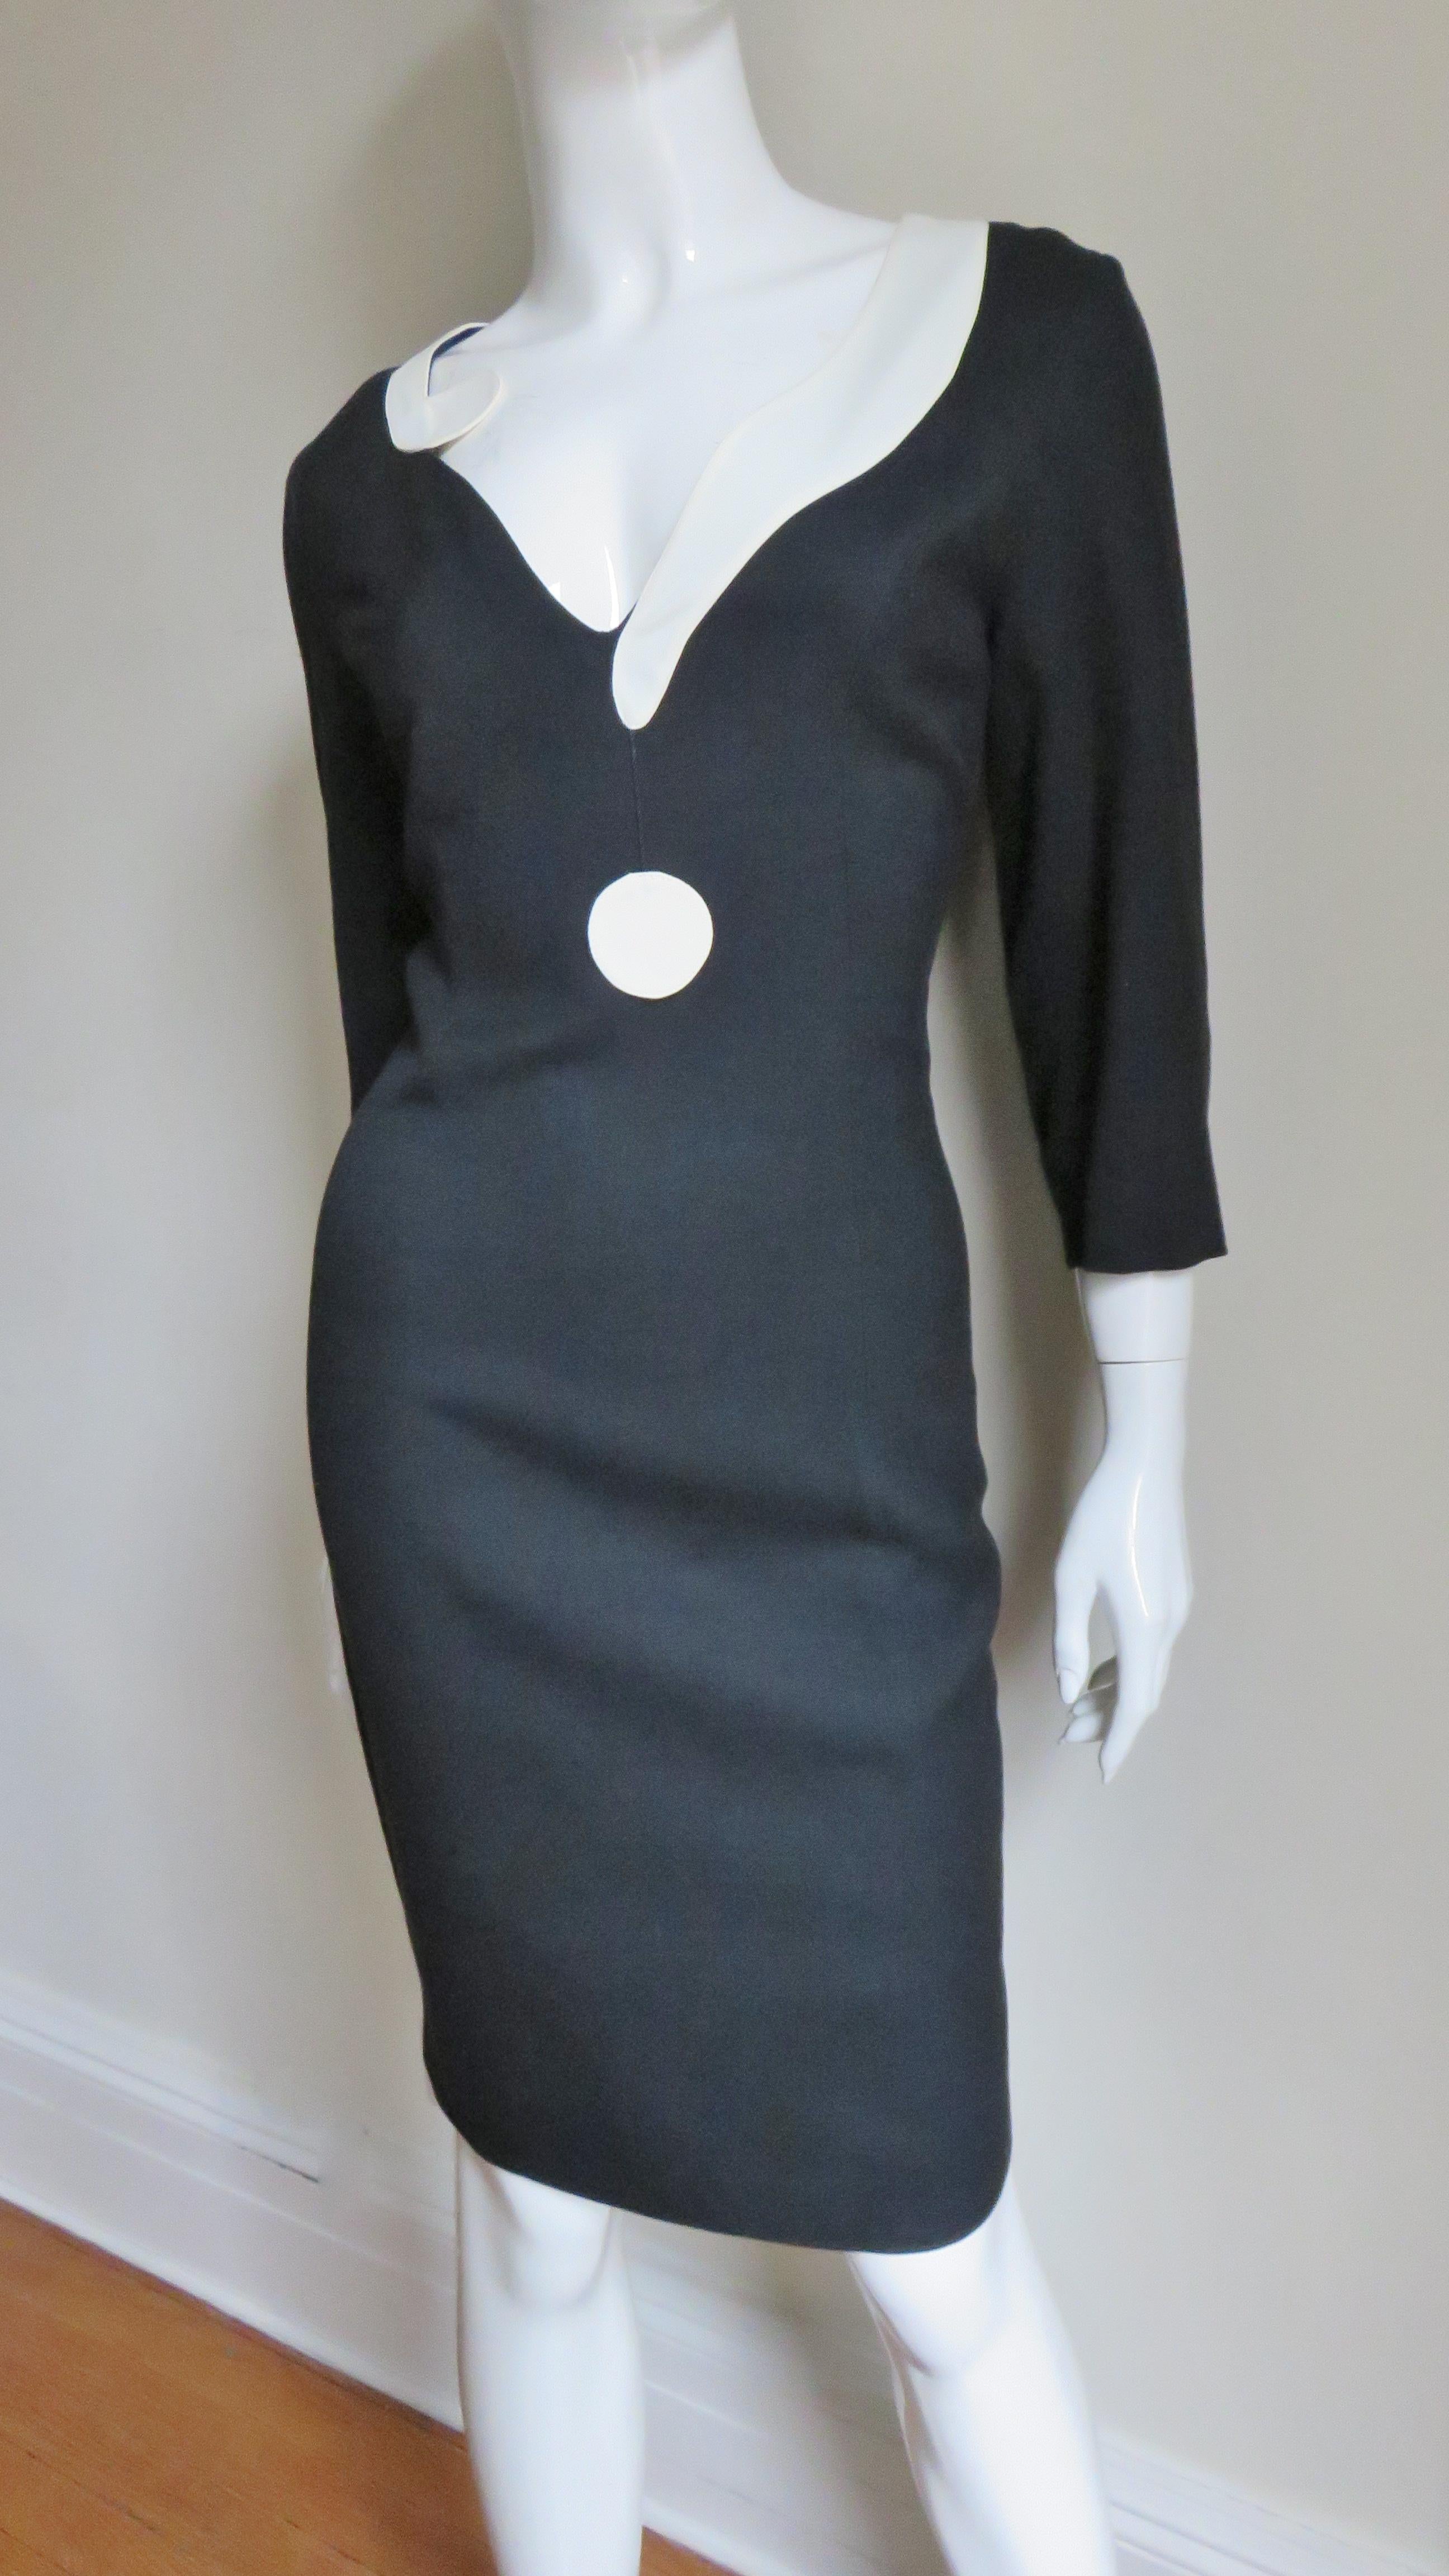 Moschino Couture Dress with Question Mark Collar A/W 1998 For Sale 2